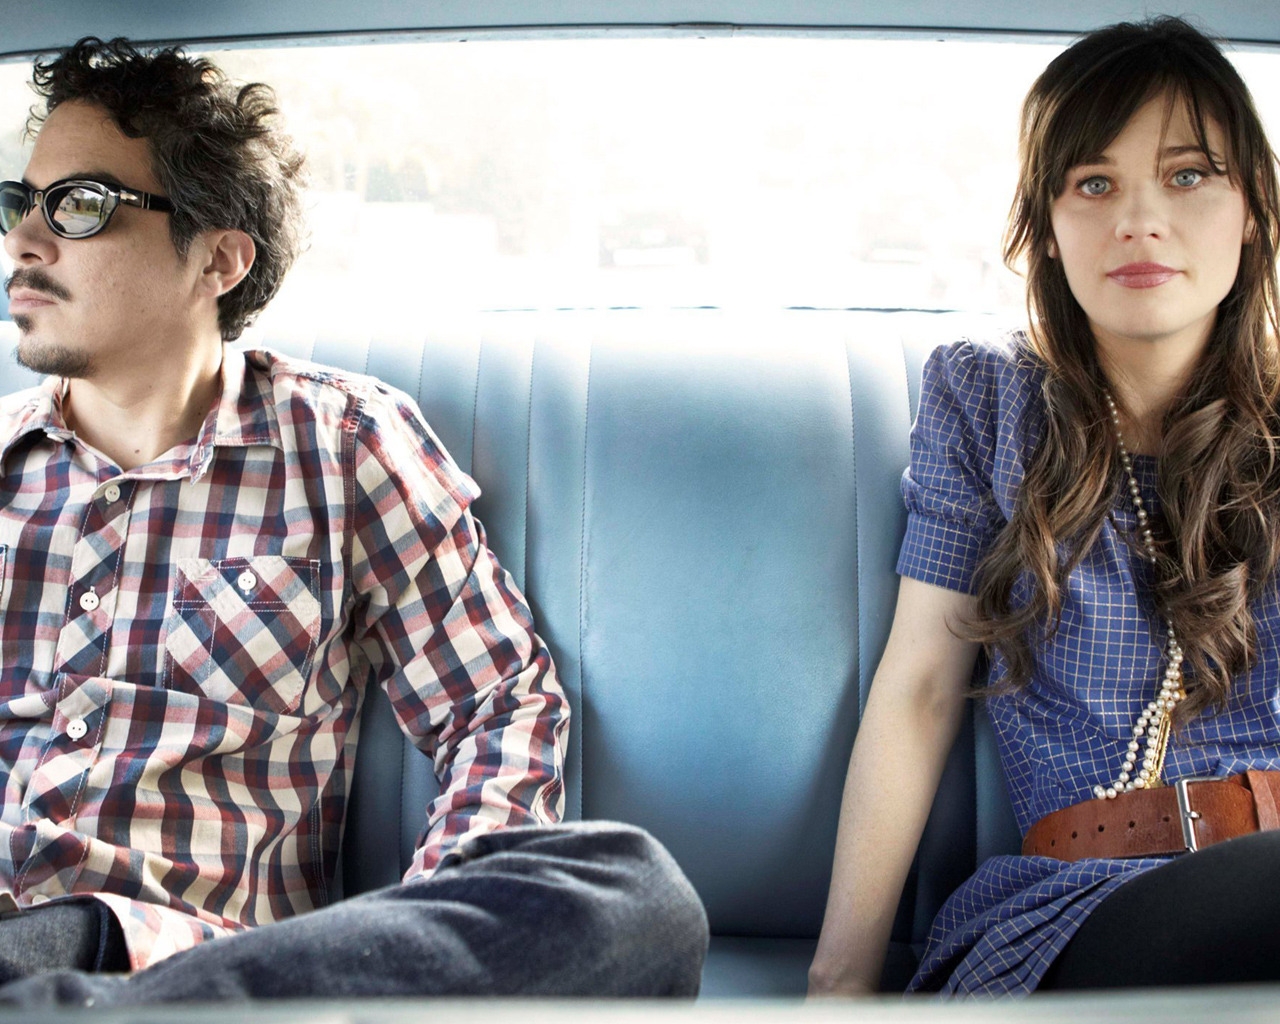 She and Him Band for 1280 x 1024 resolution